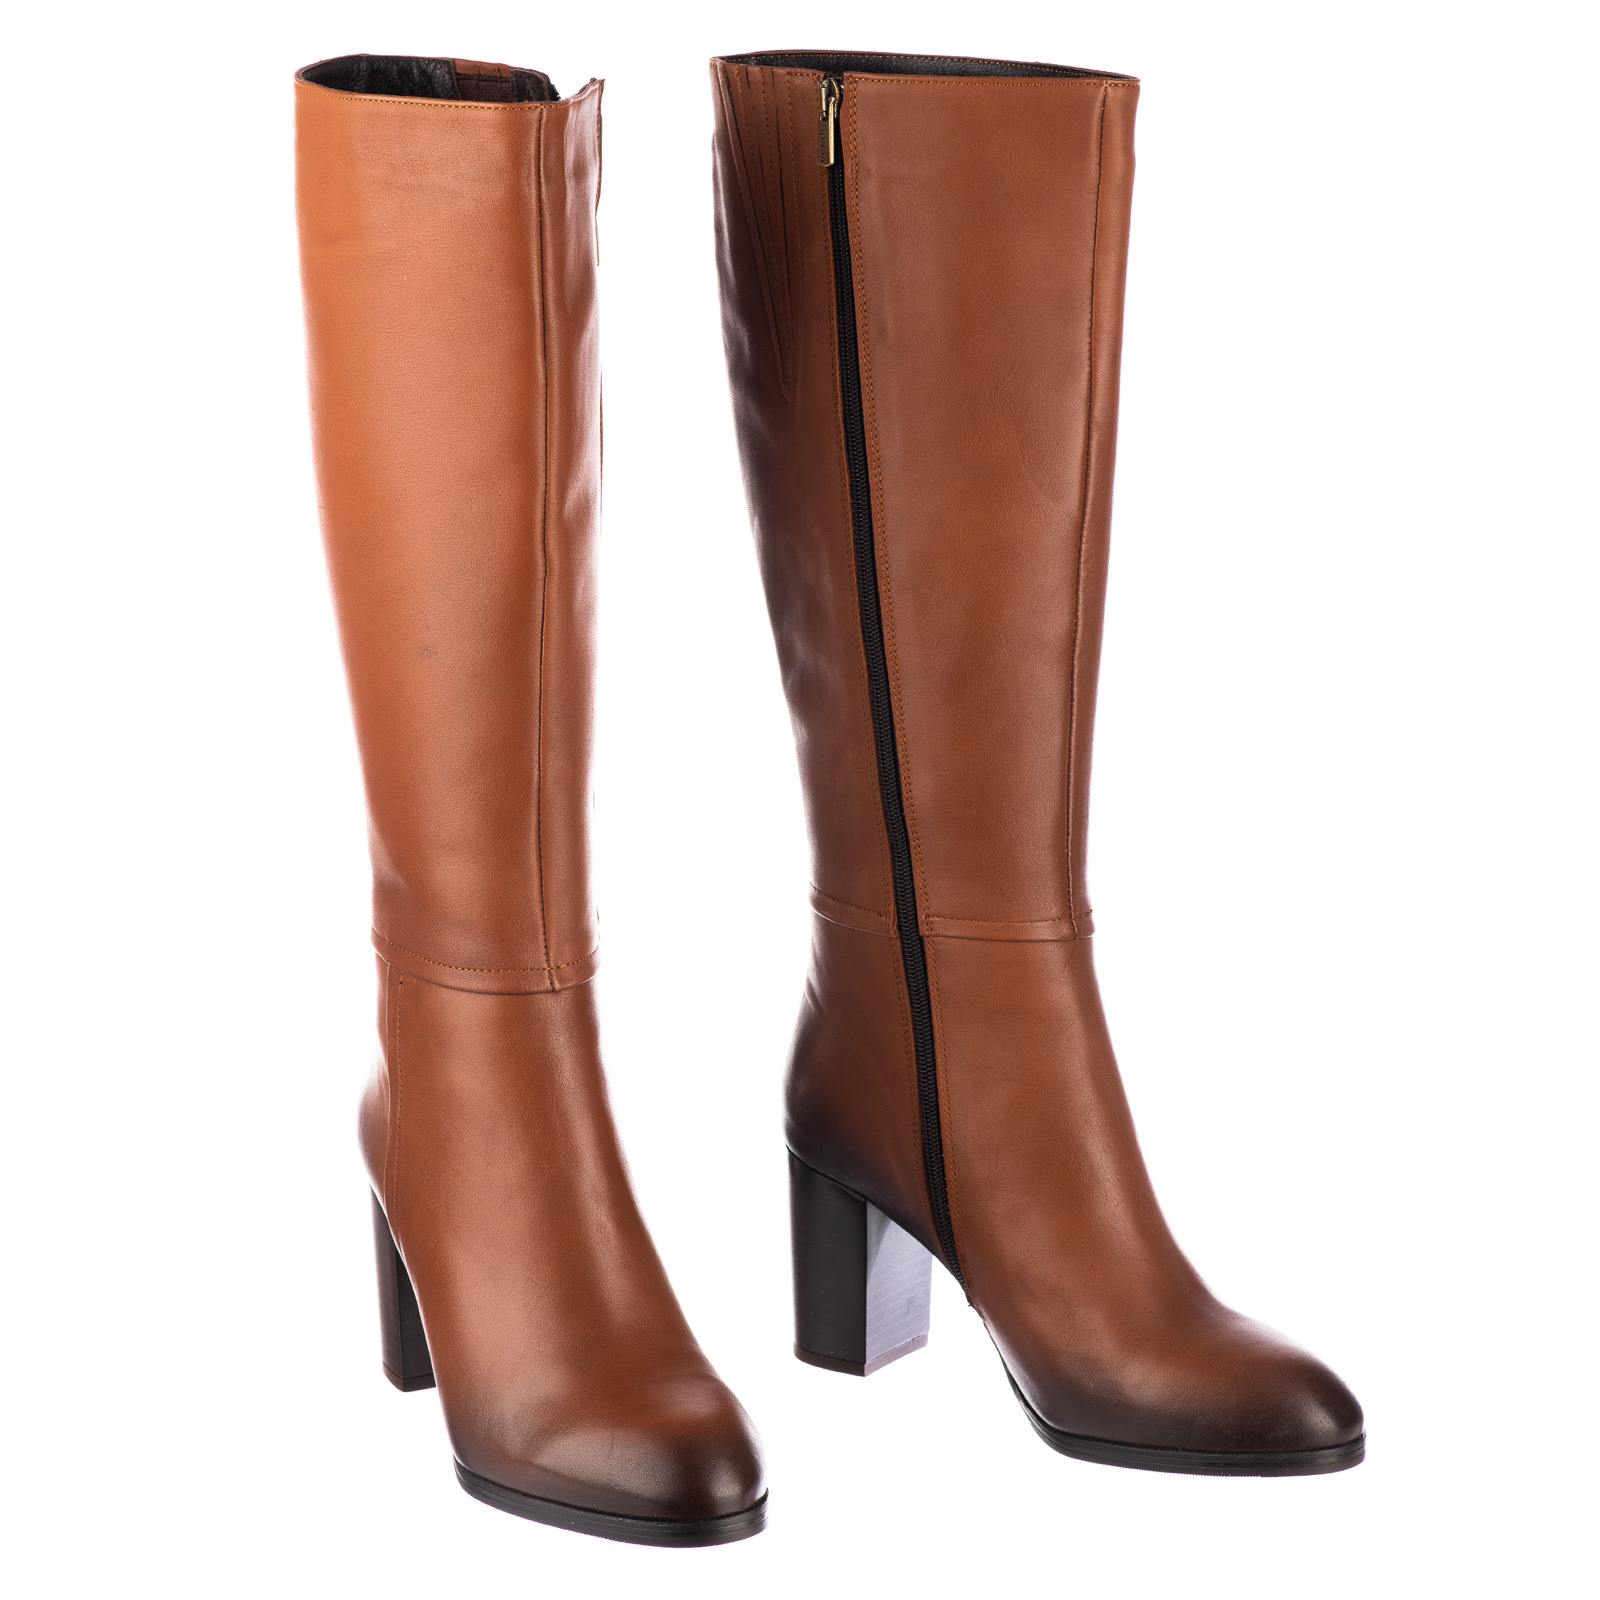 Leather boots B659 - CAMEL